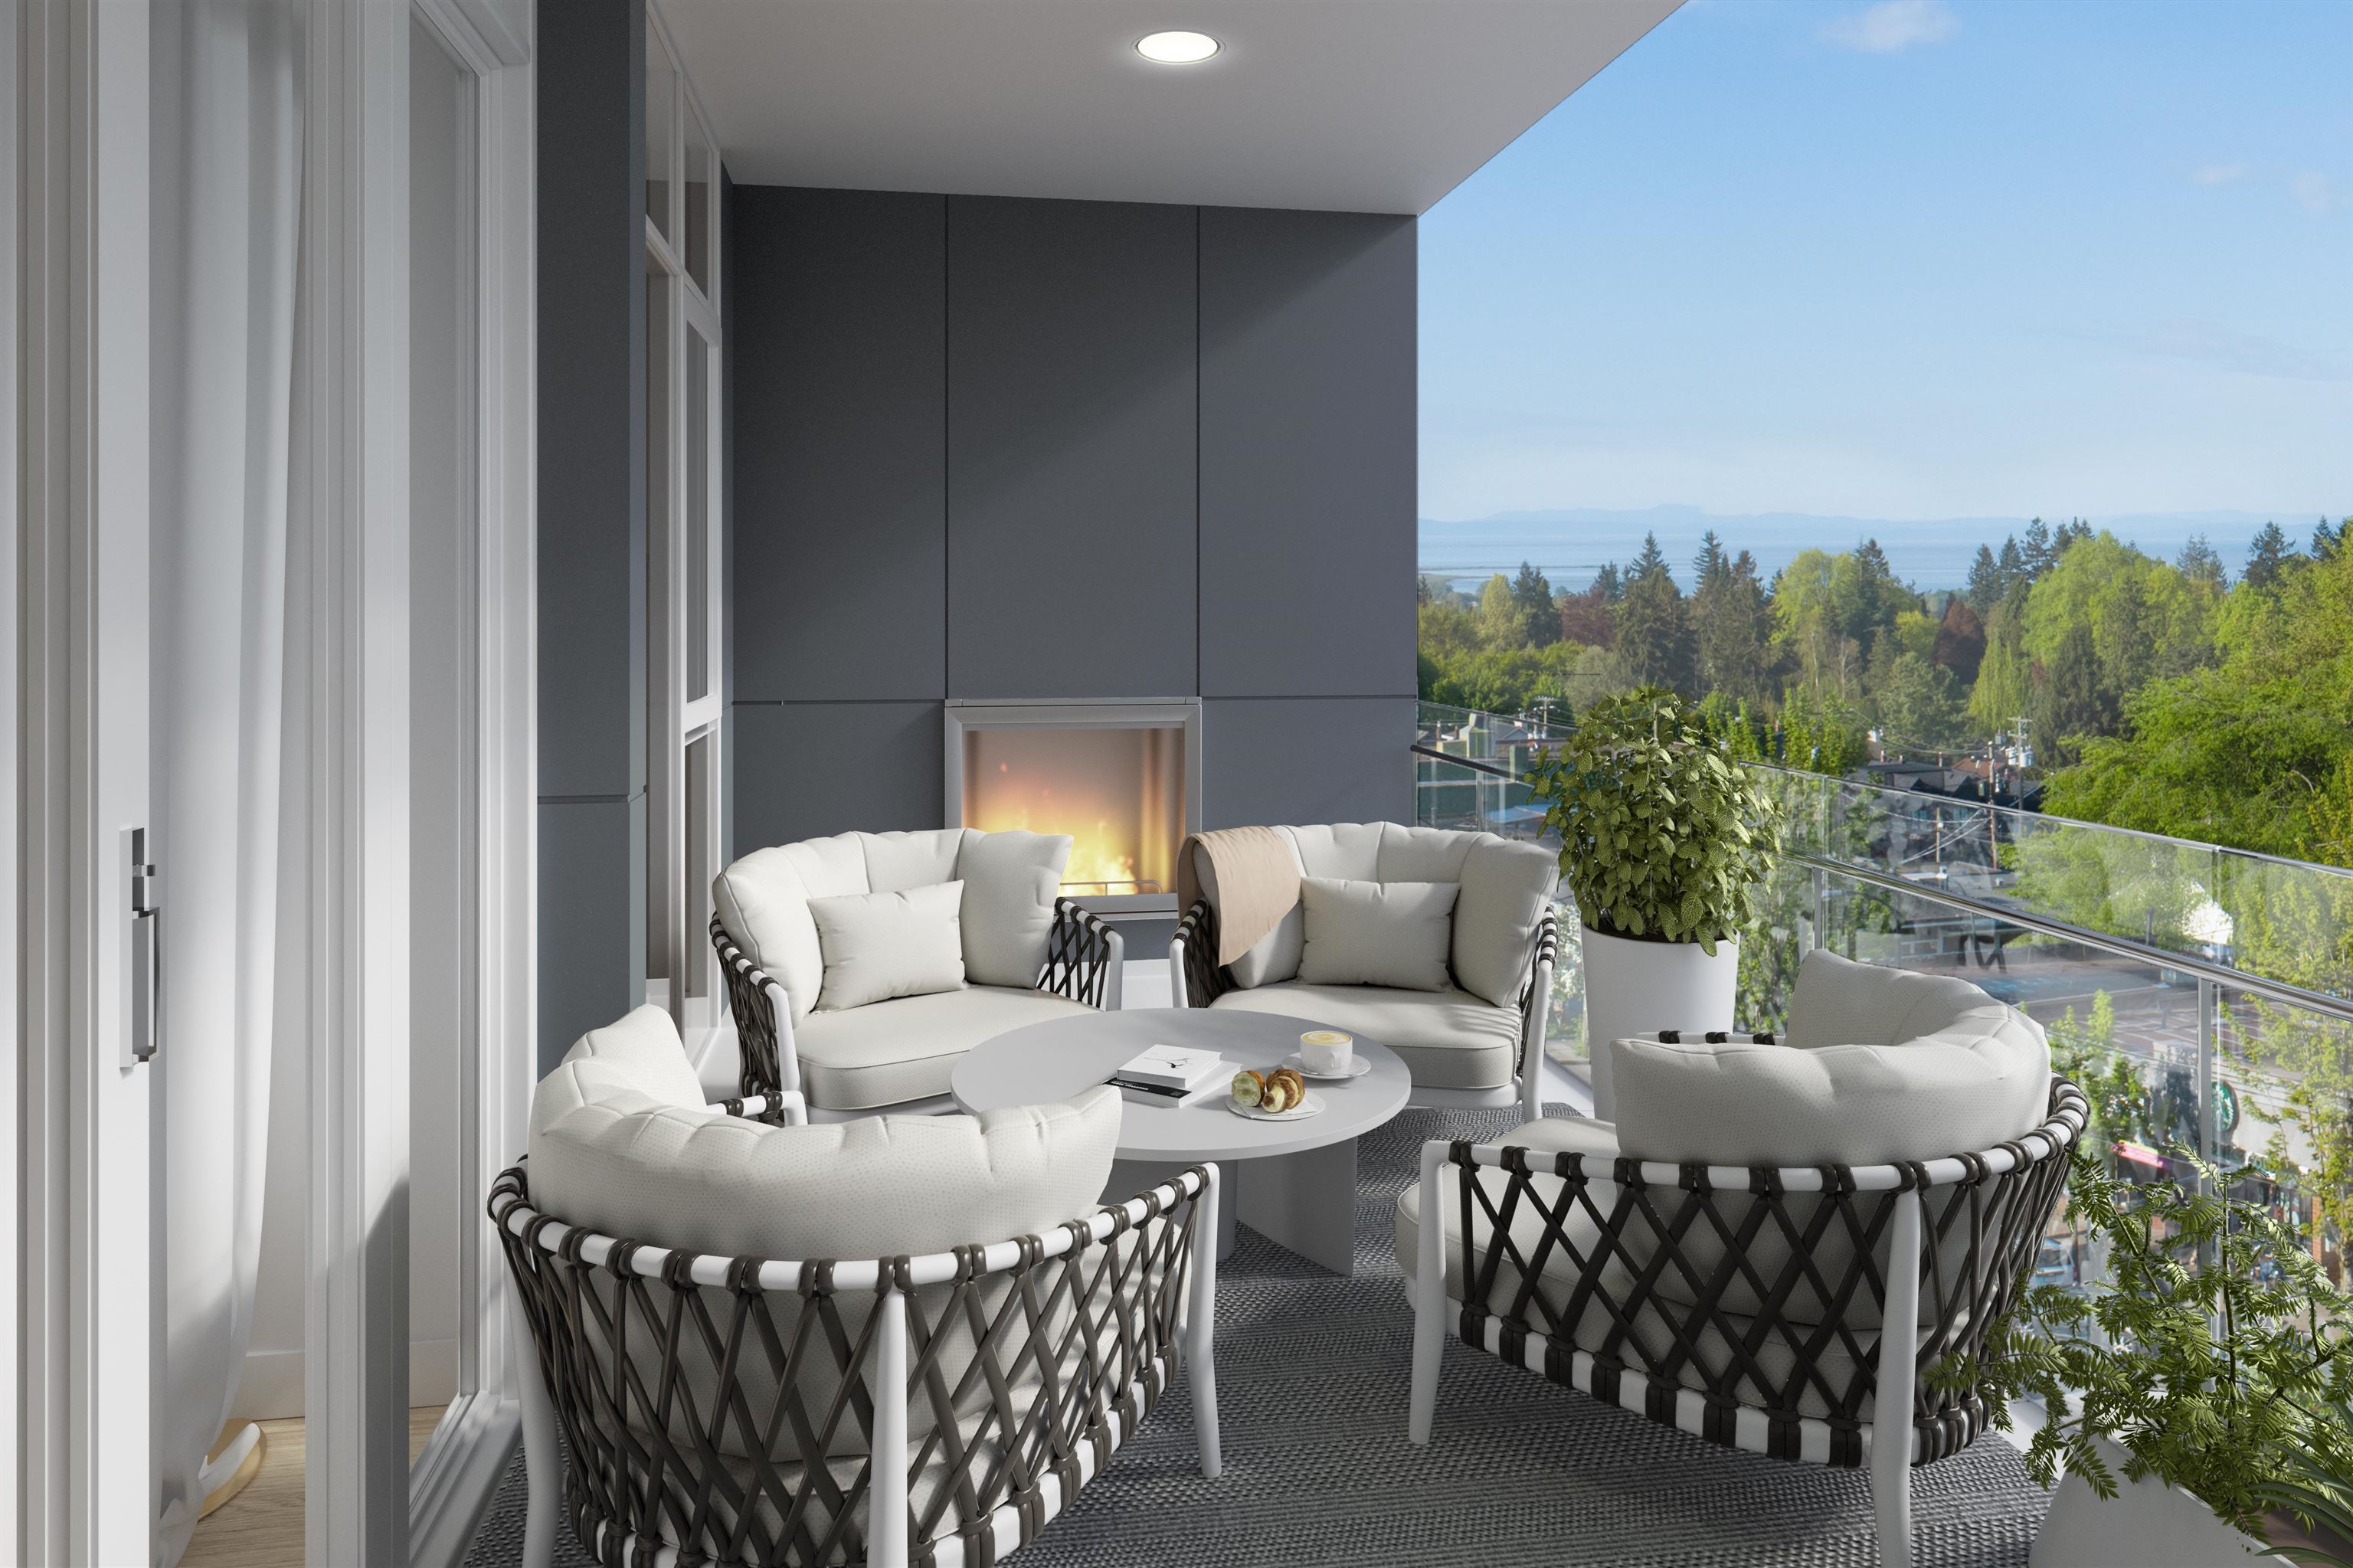 Rendering of outdoor space with heated gas fireplace.